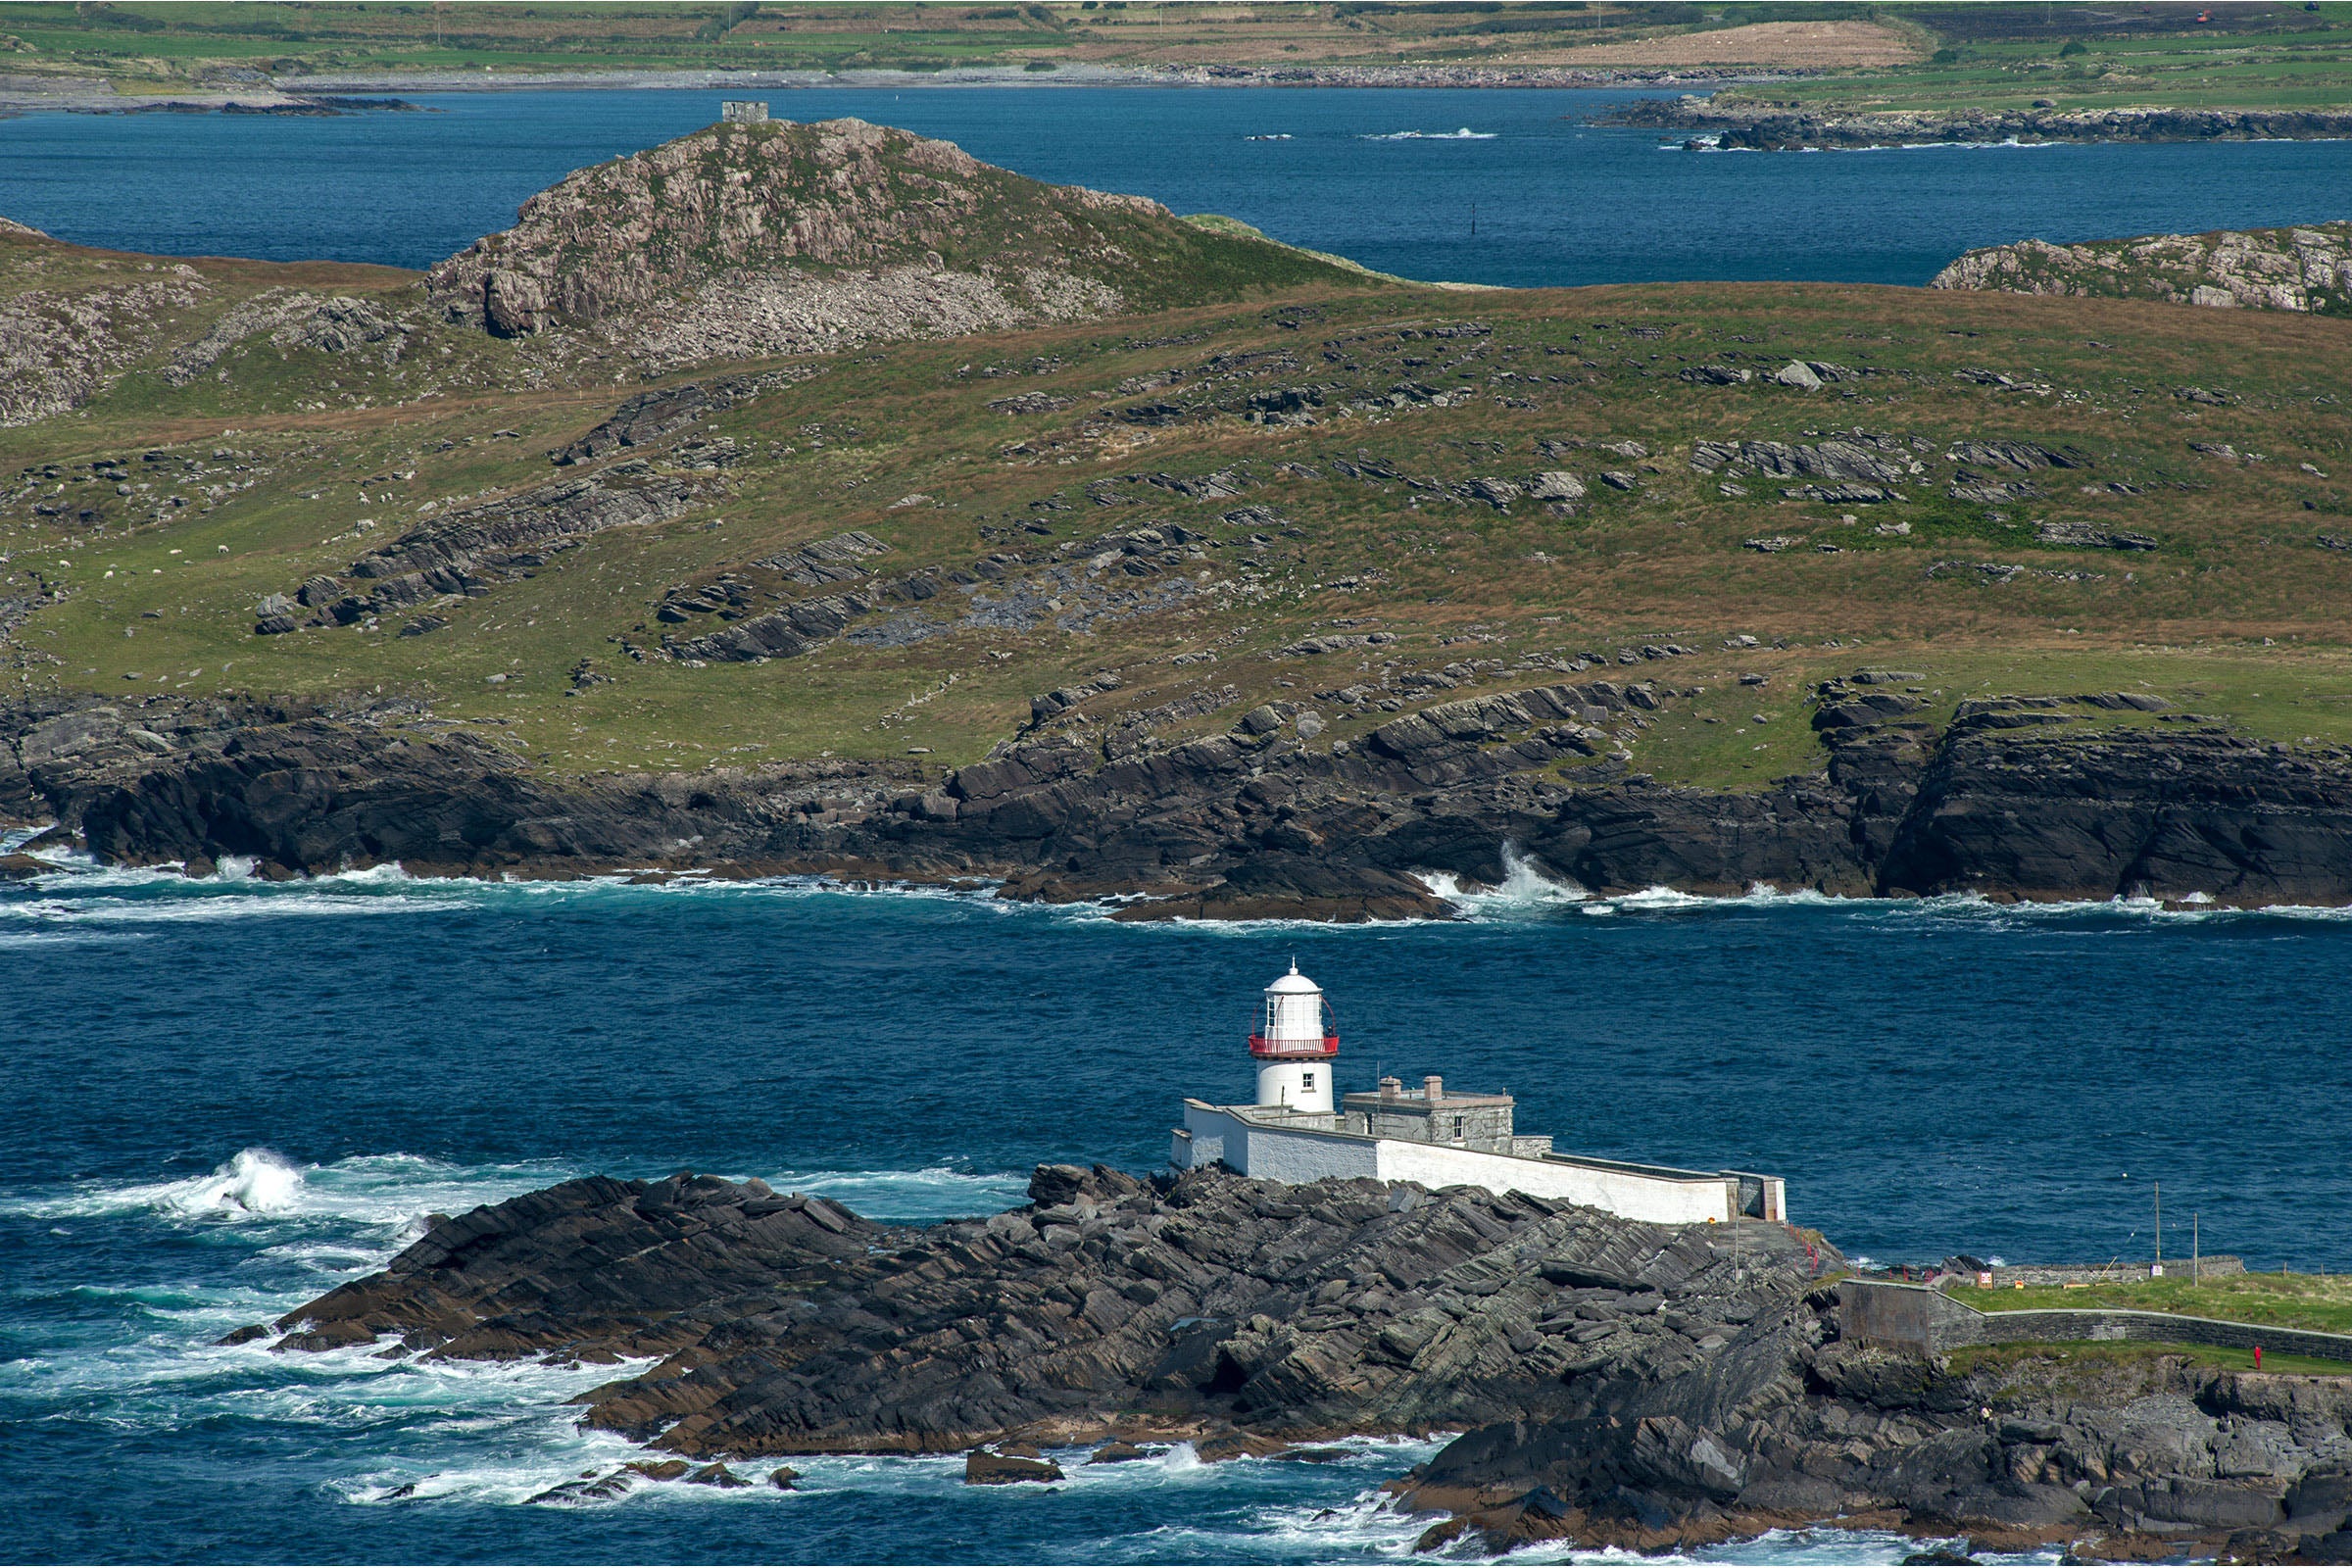 Visit Valentia Island - Kerry with Discover Ireland